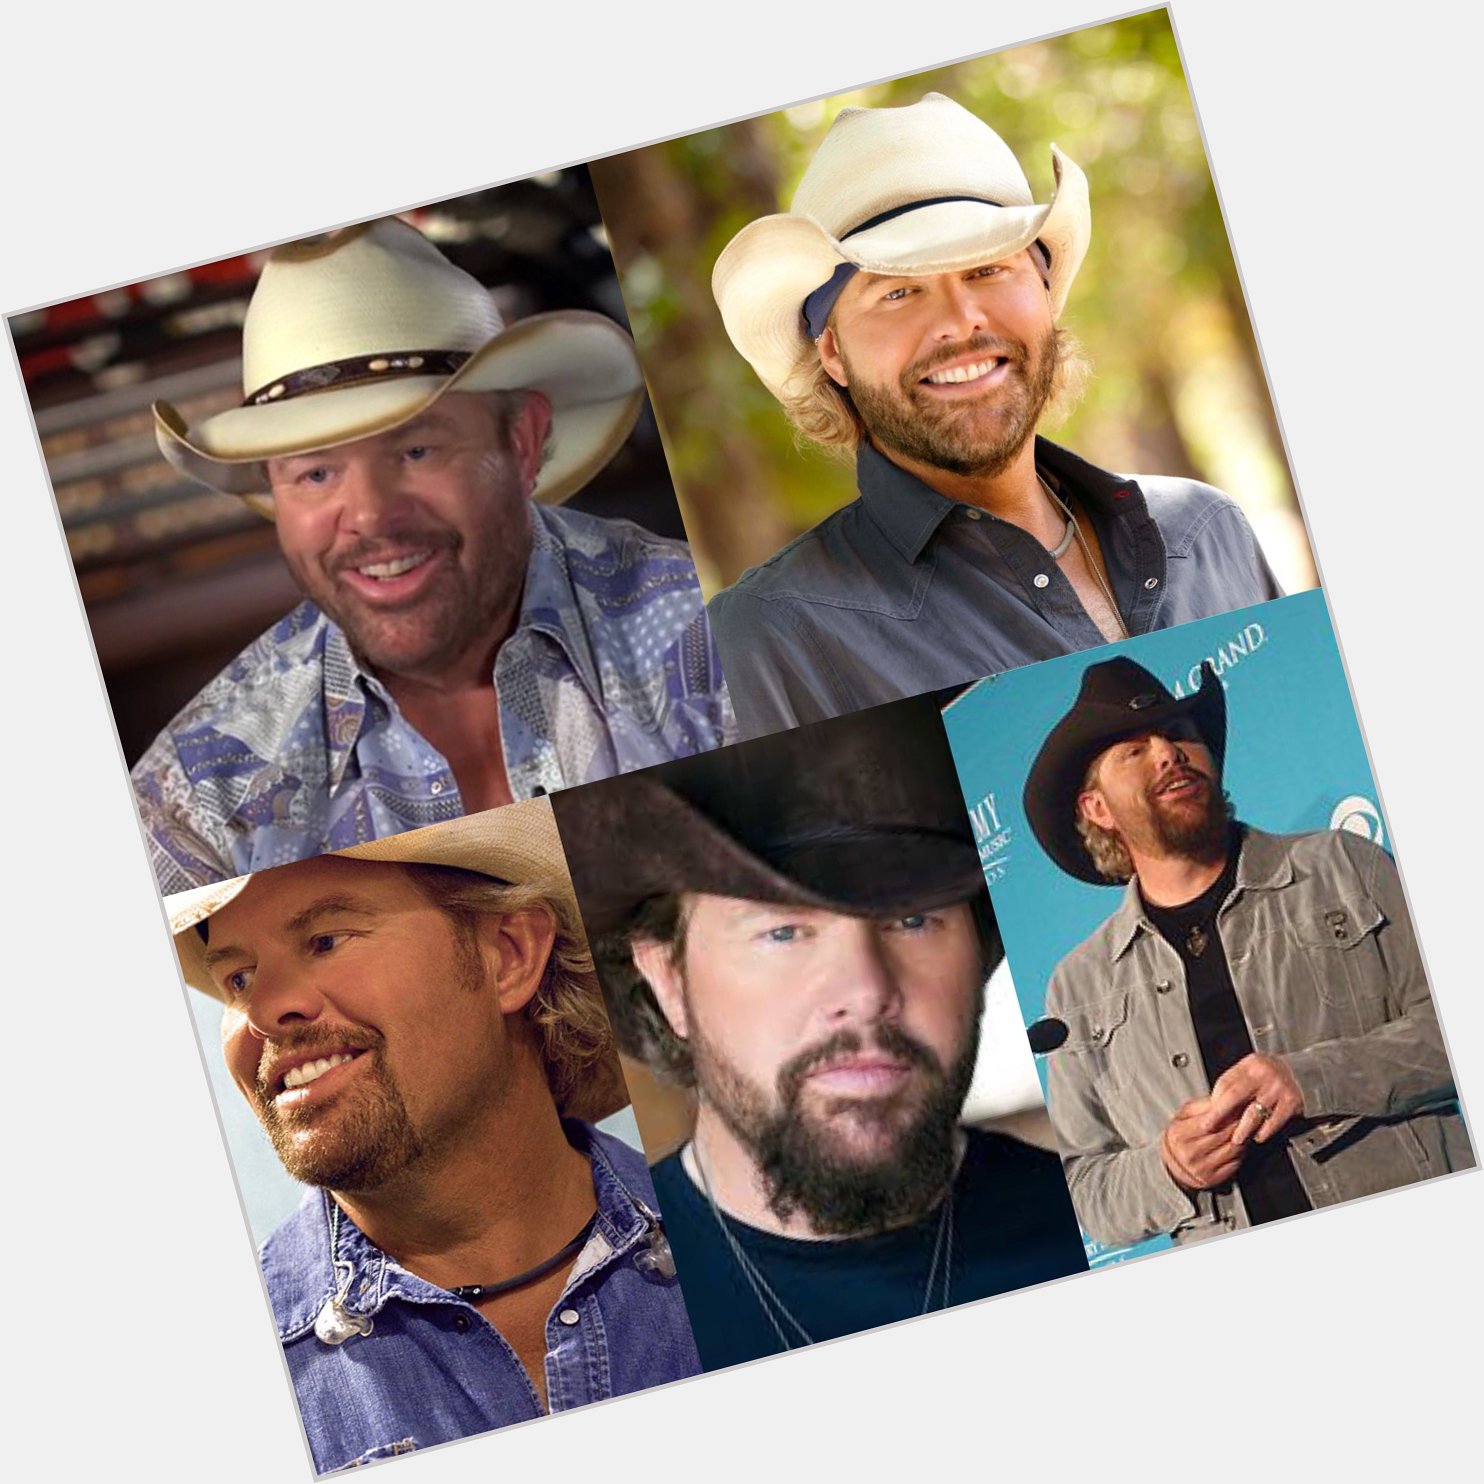 Happy 58 birthday to Toby Keith. Hope that he has a wonderful birthday.      